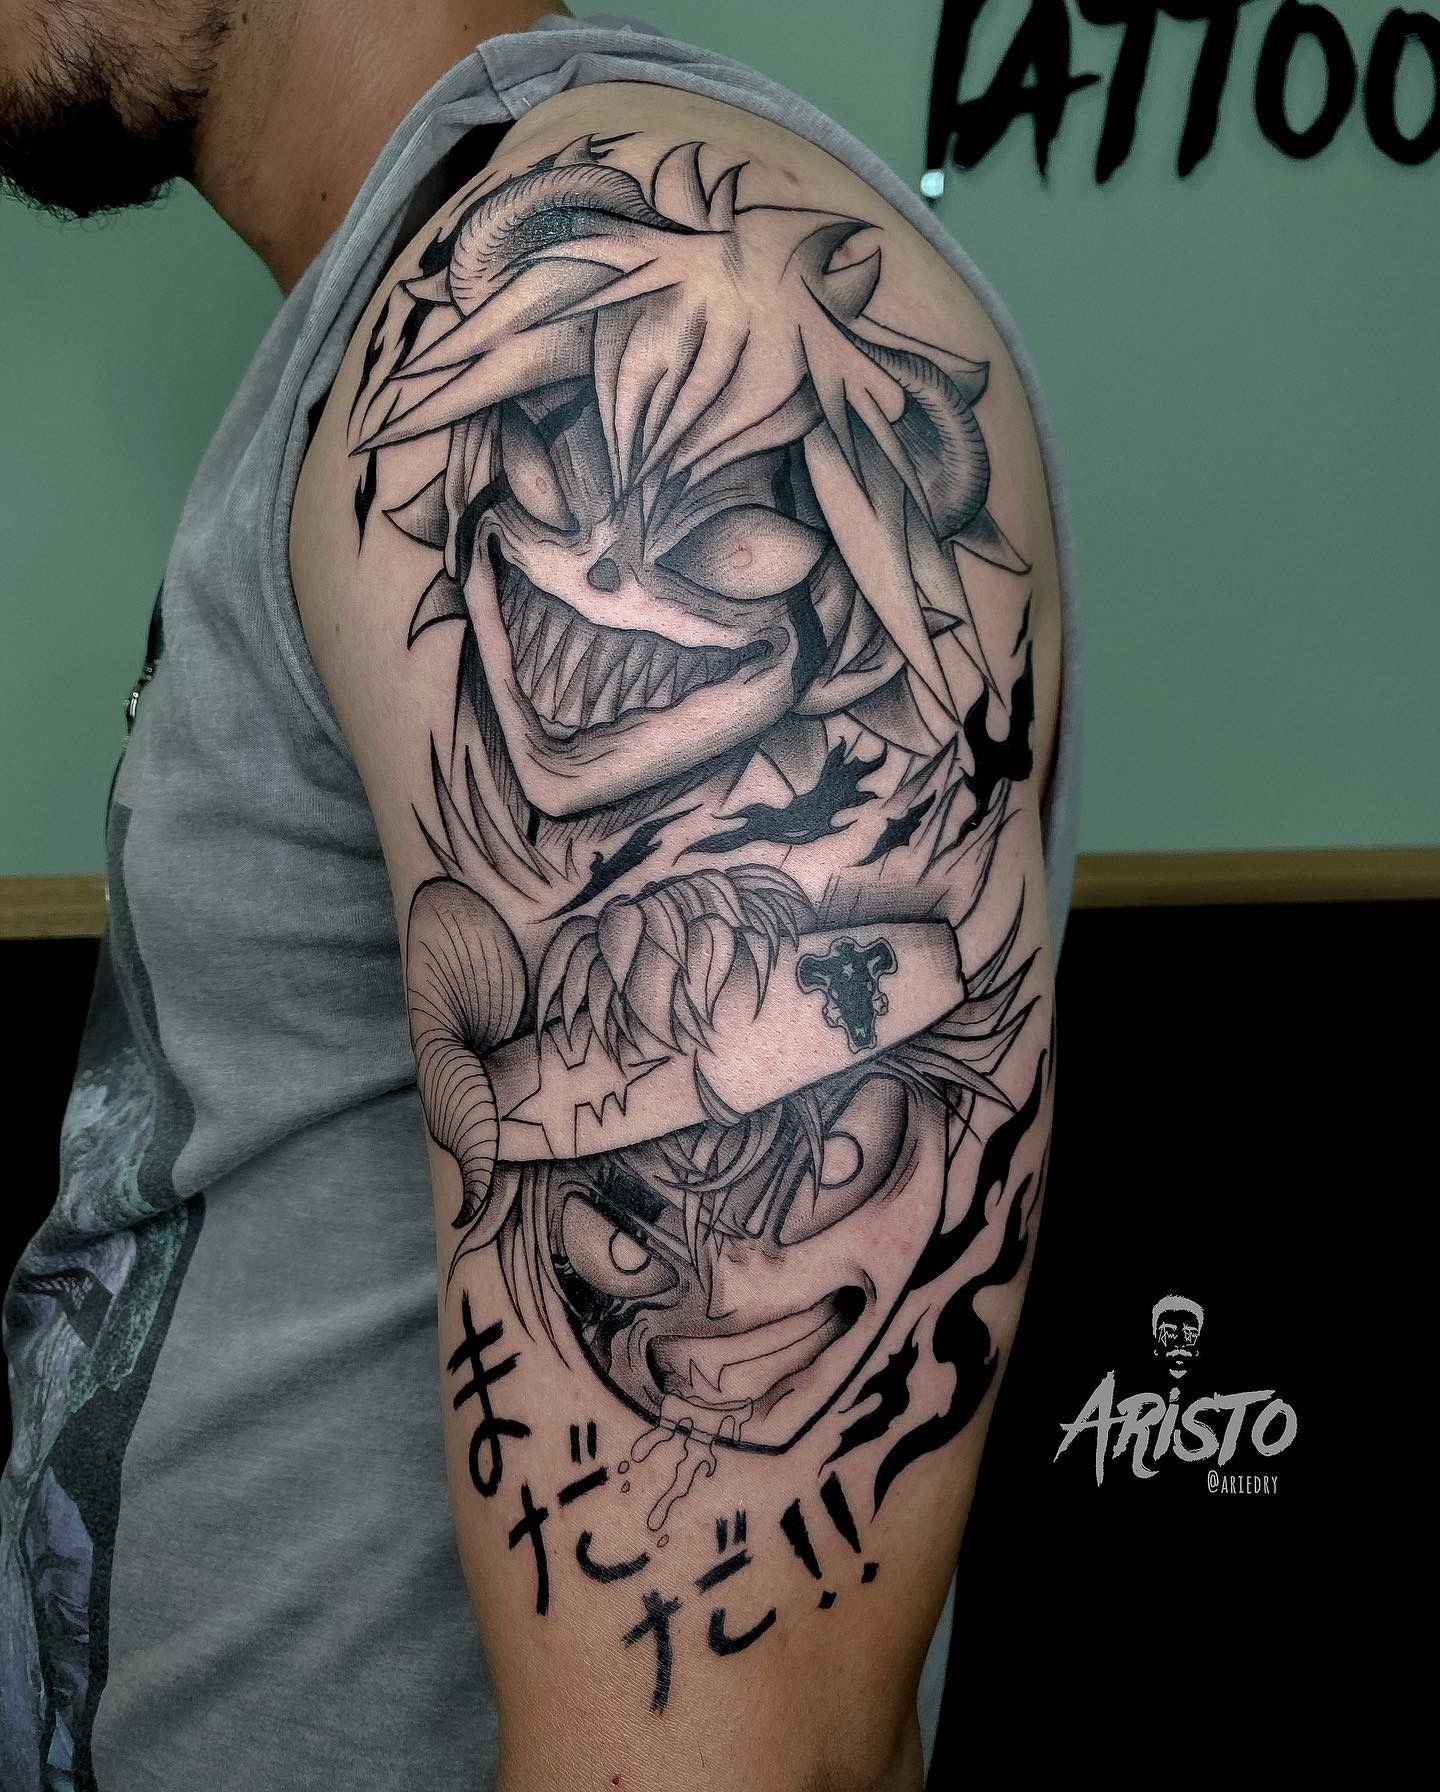 Armored titan made by my good friend stephen cortez at hariato tattoo in  Katy Texas  rtattoo